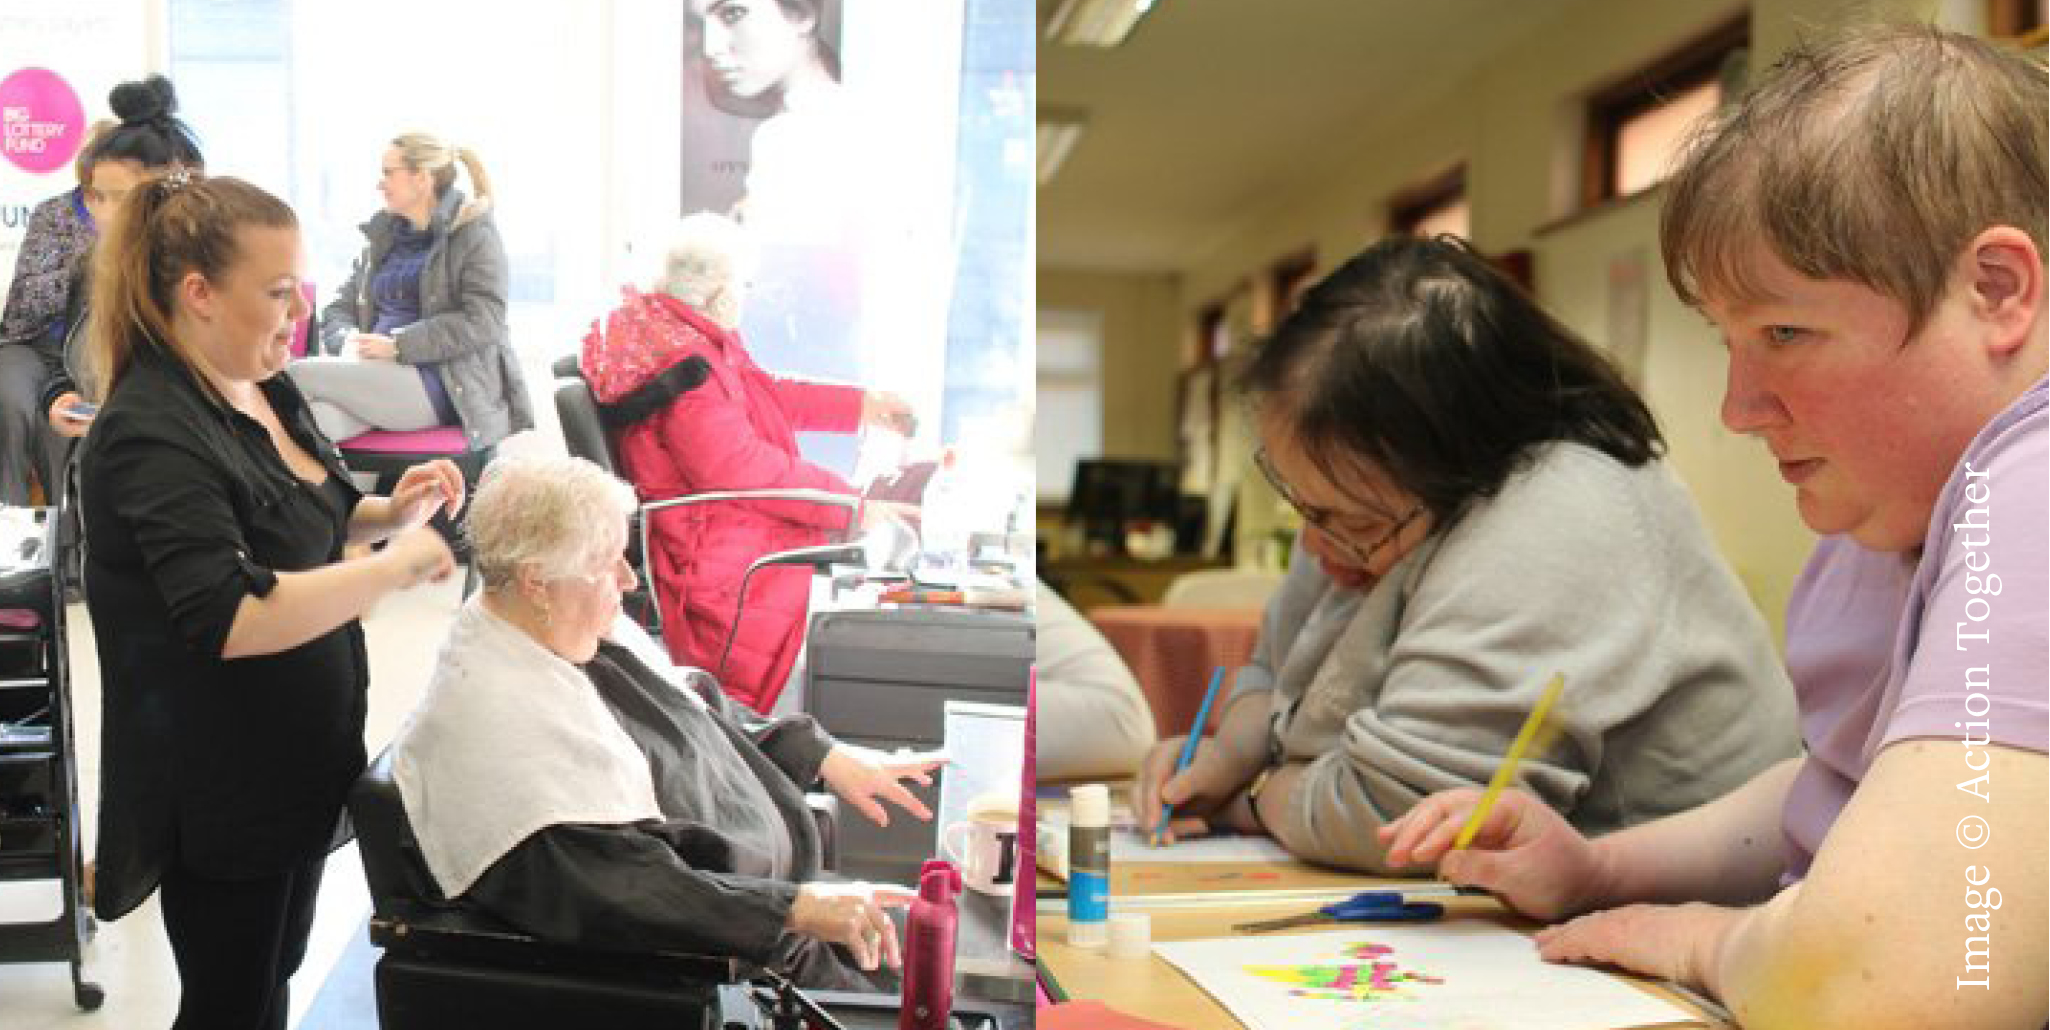 A split image showing a hairdresser cutting an older persons hair, and some young adults in a classroom setting